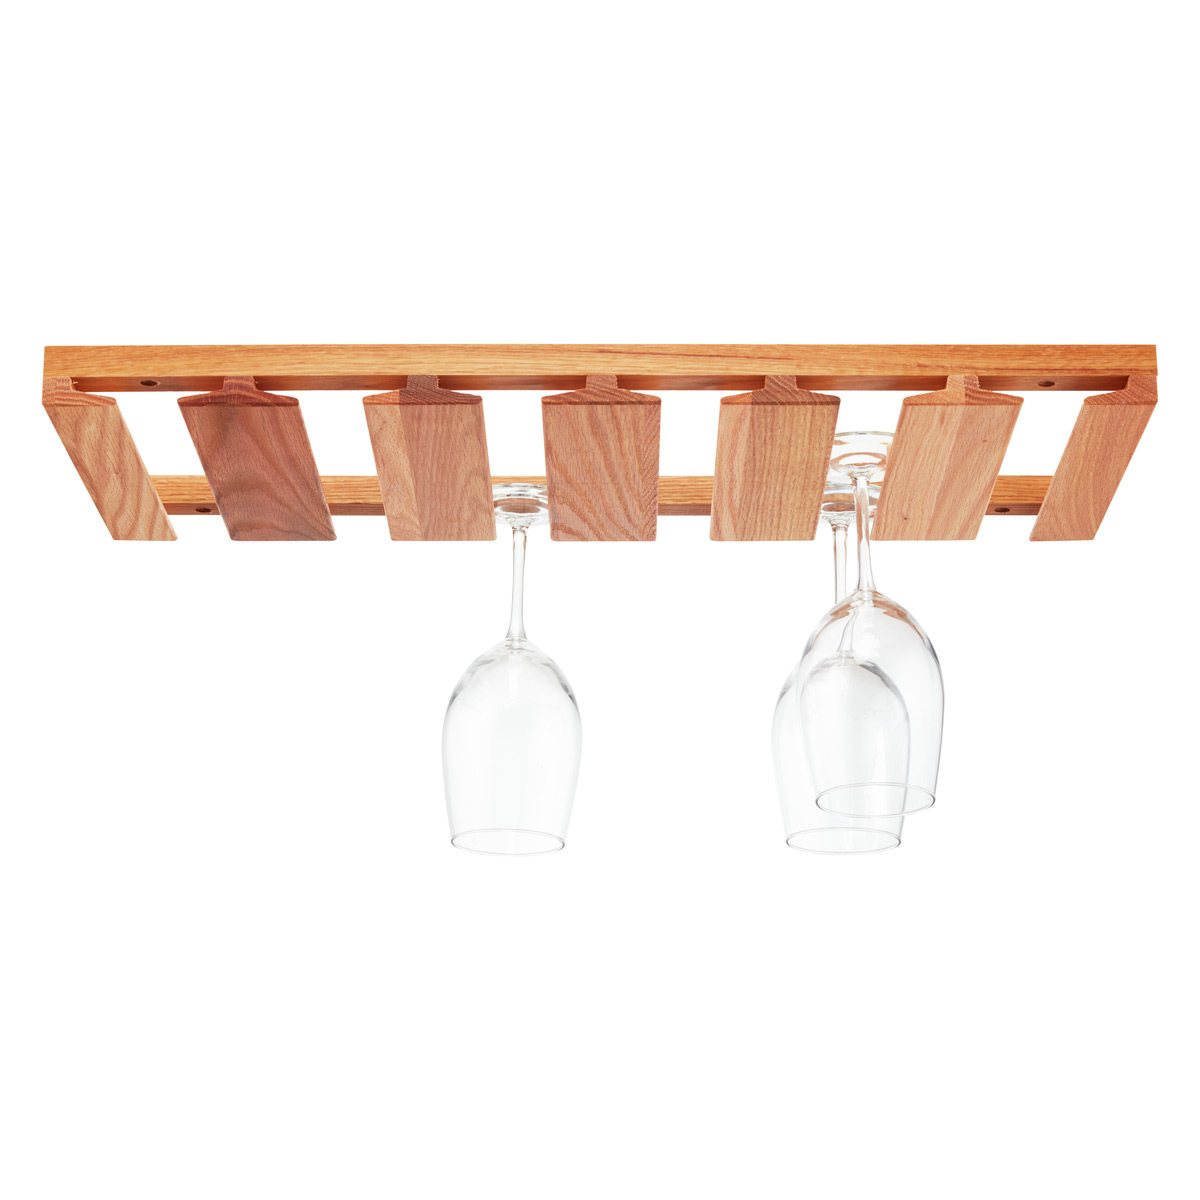 Oak Undercabinet Wine Glass Rack | The Container Store